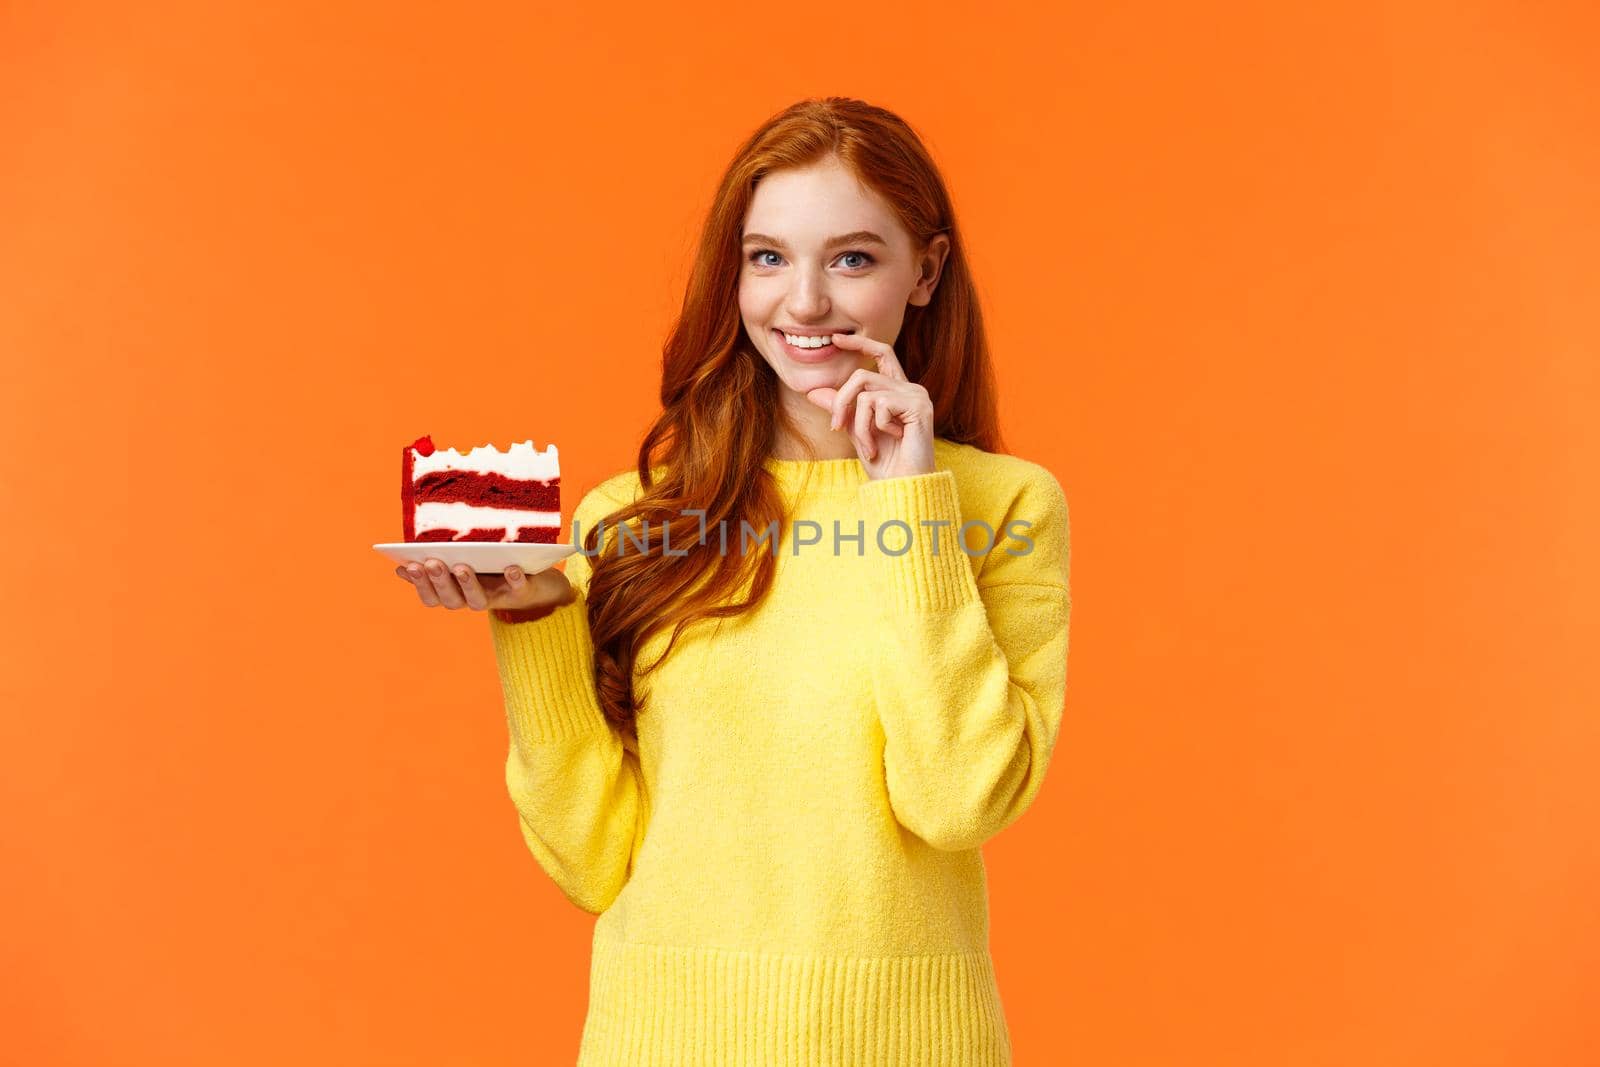 Girl wants share her piece cake with loved one. Romantic silly cute girlfriend brink piece dessert to eat together, smiling and touching lip flirty, eating junk food during diet, orange background.